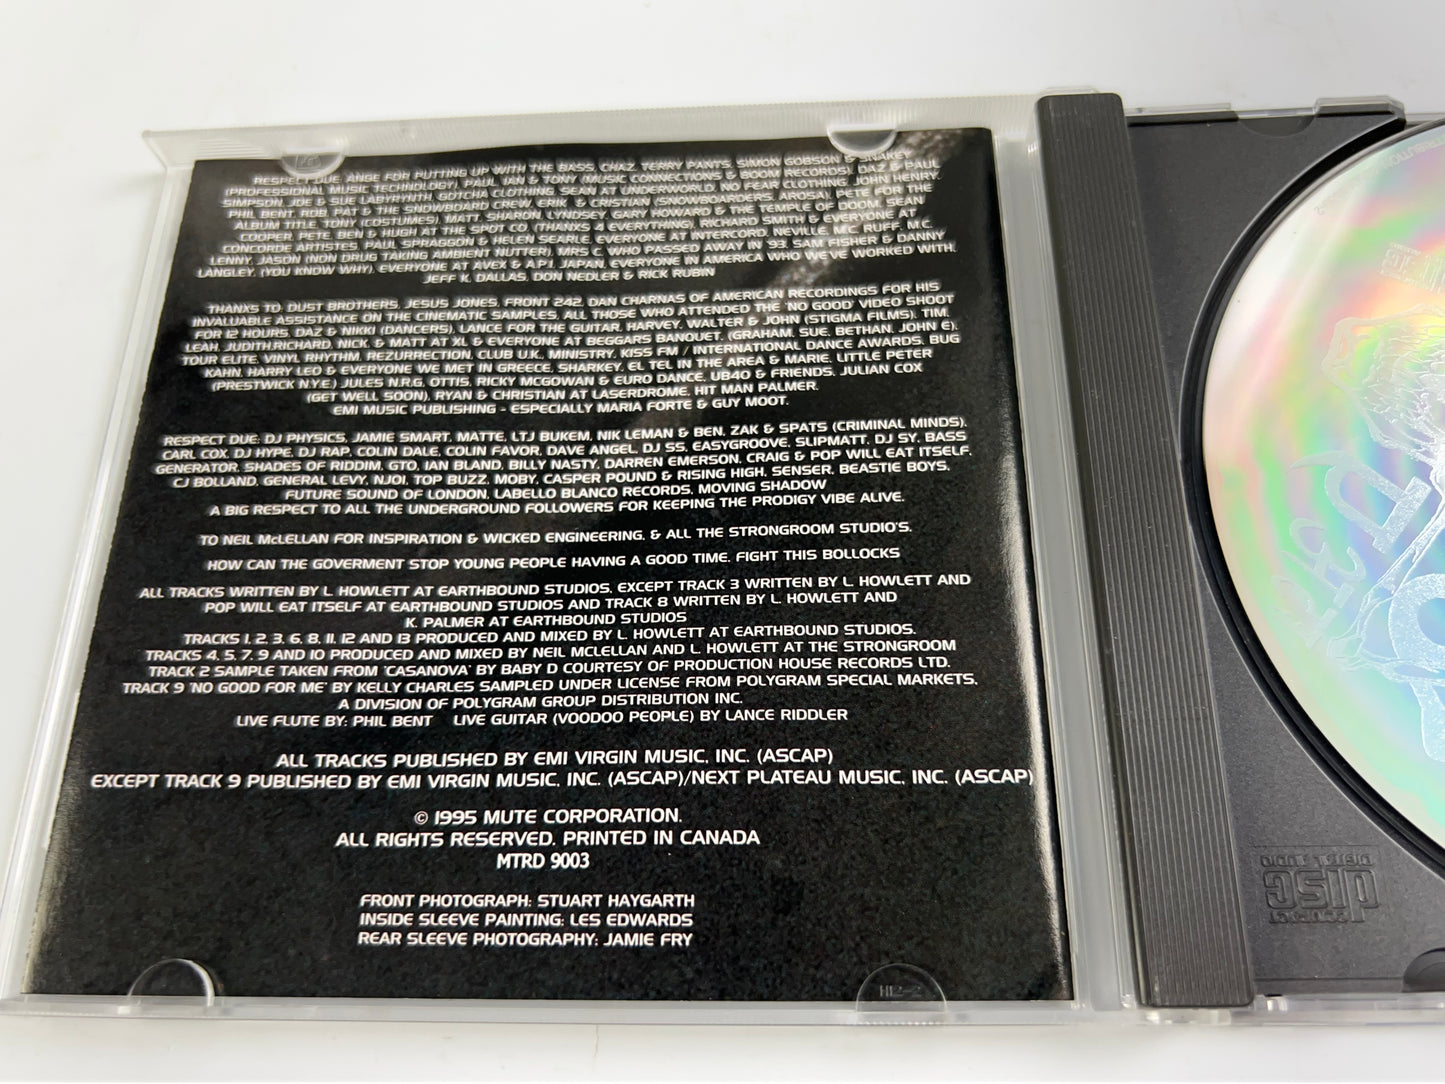 Prodigy Music For The Jilted Generation Intro Break & Enter There Law Full CD